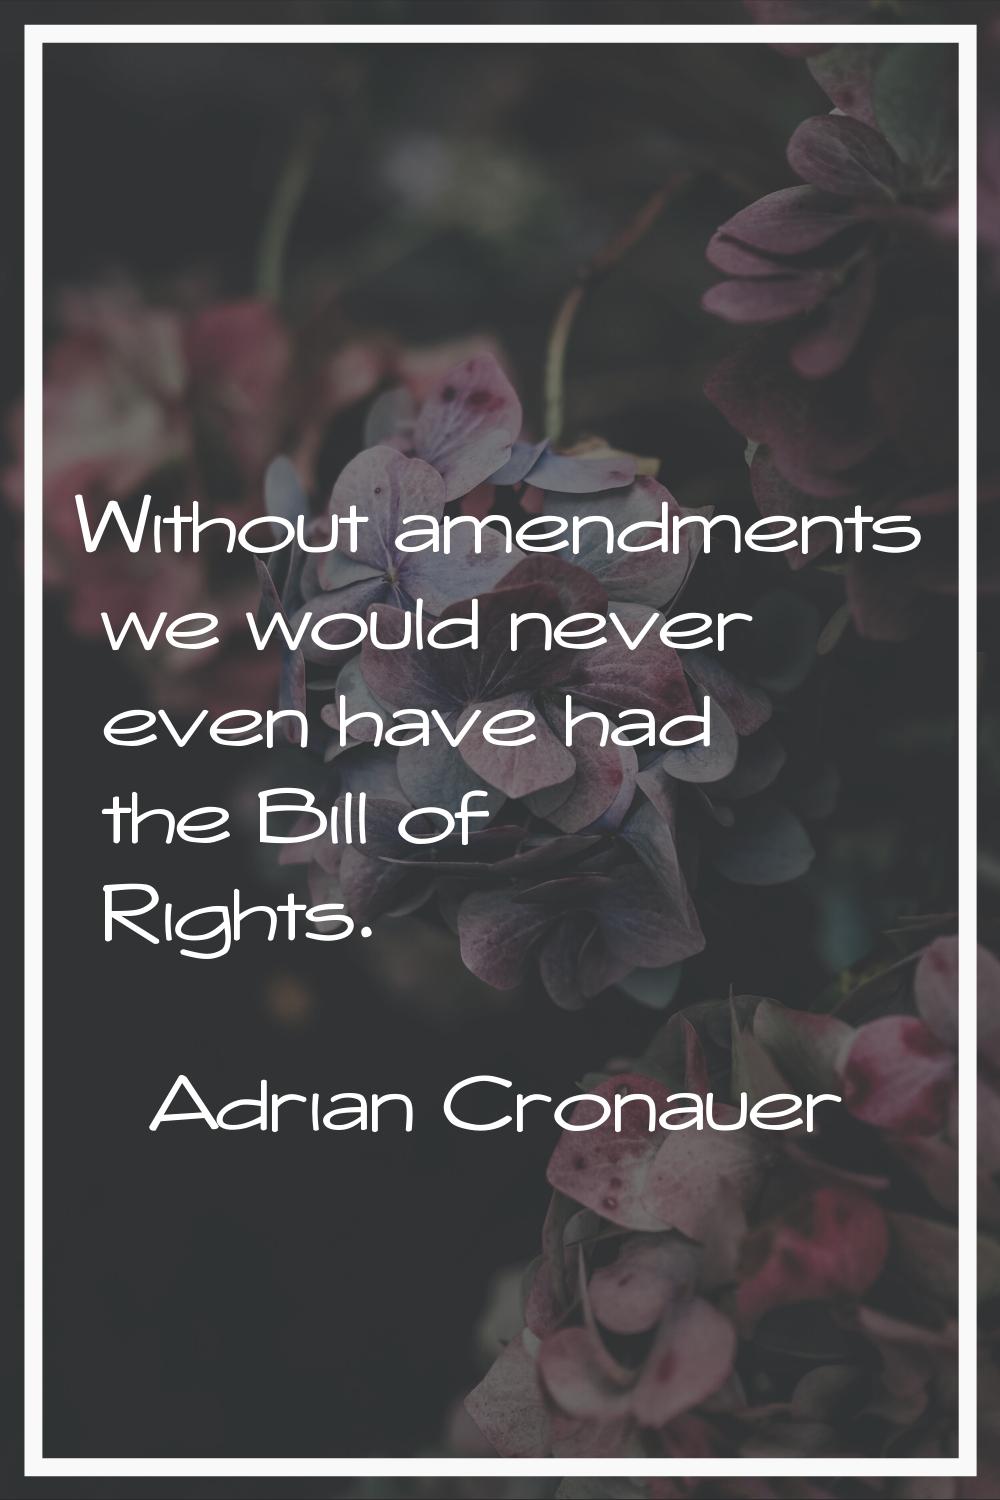 Without amendments we would never even have had the Bill of Rights.